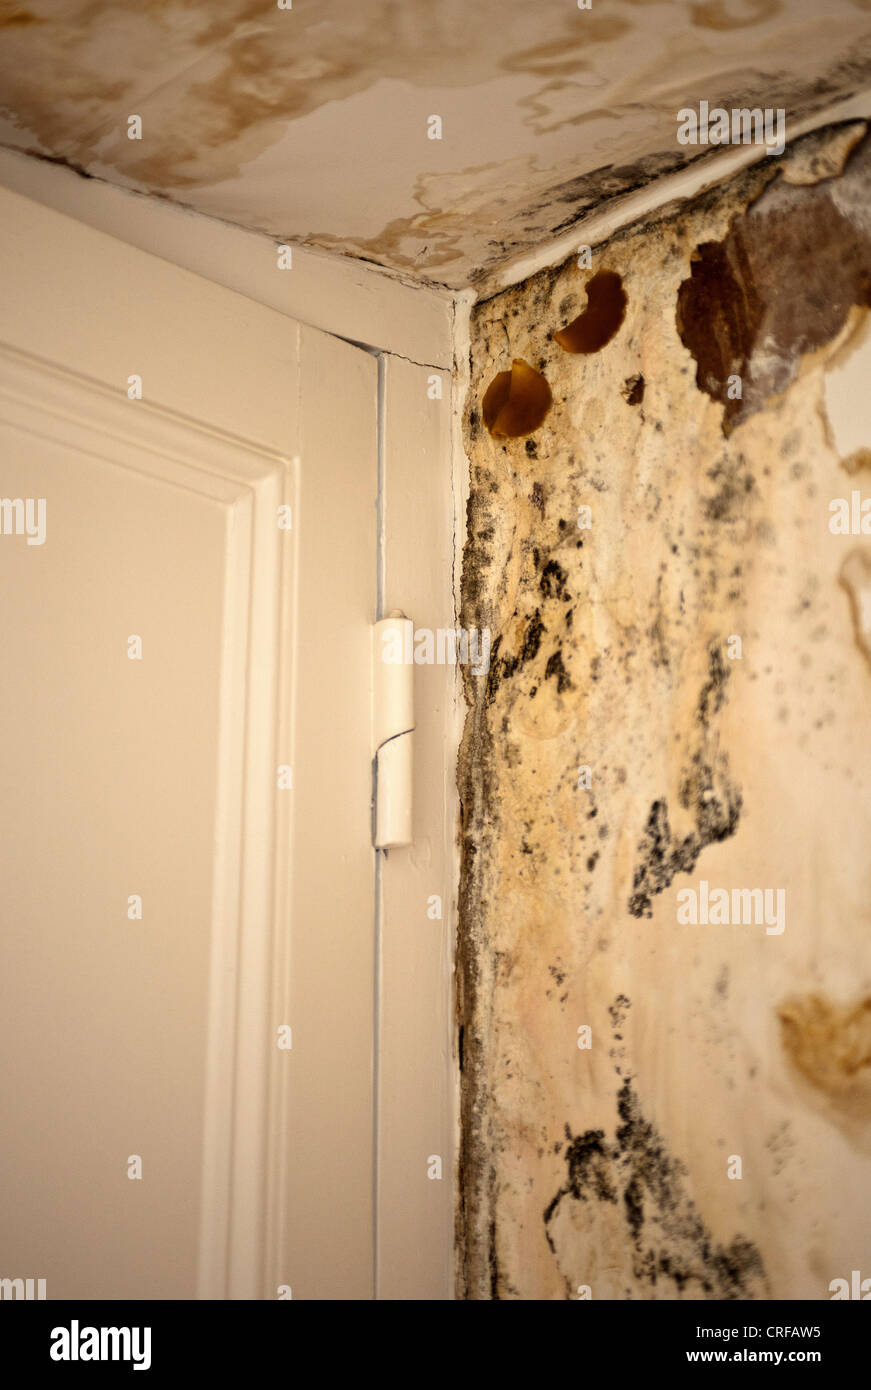 Mold and water damage to interior wall Stock Photo